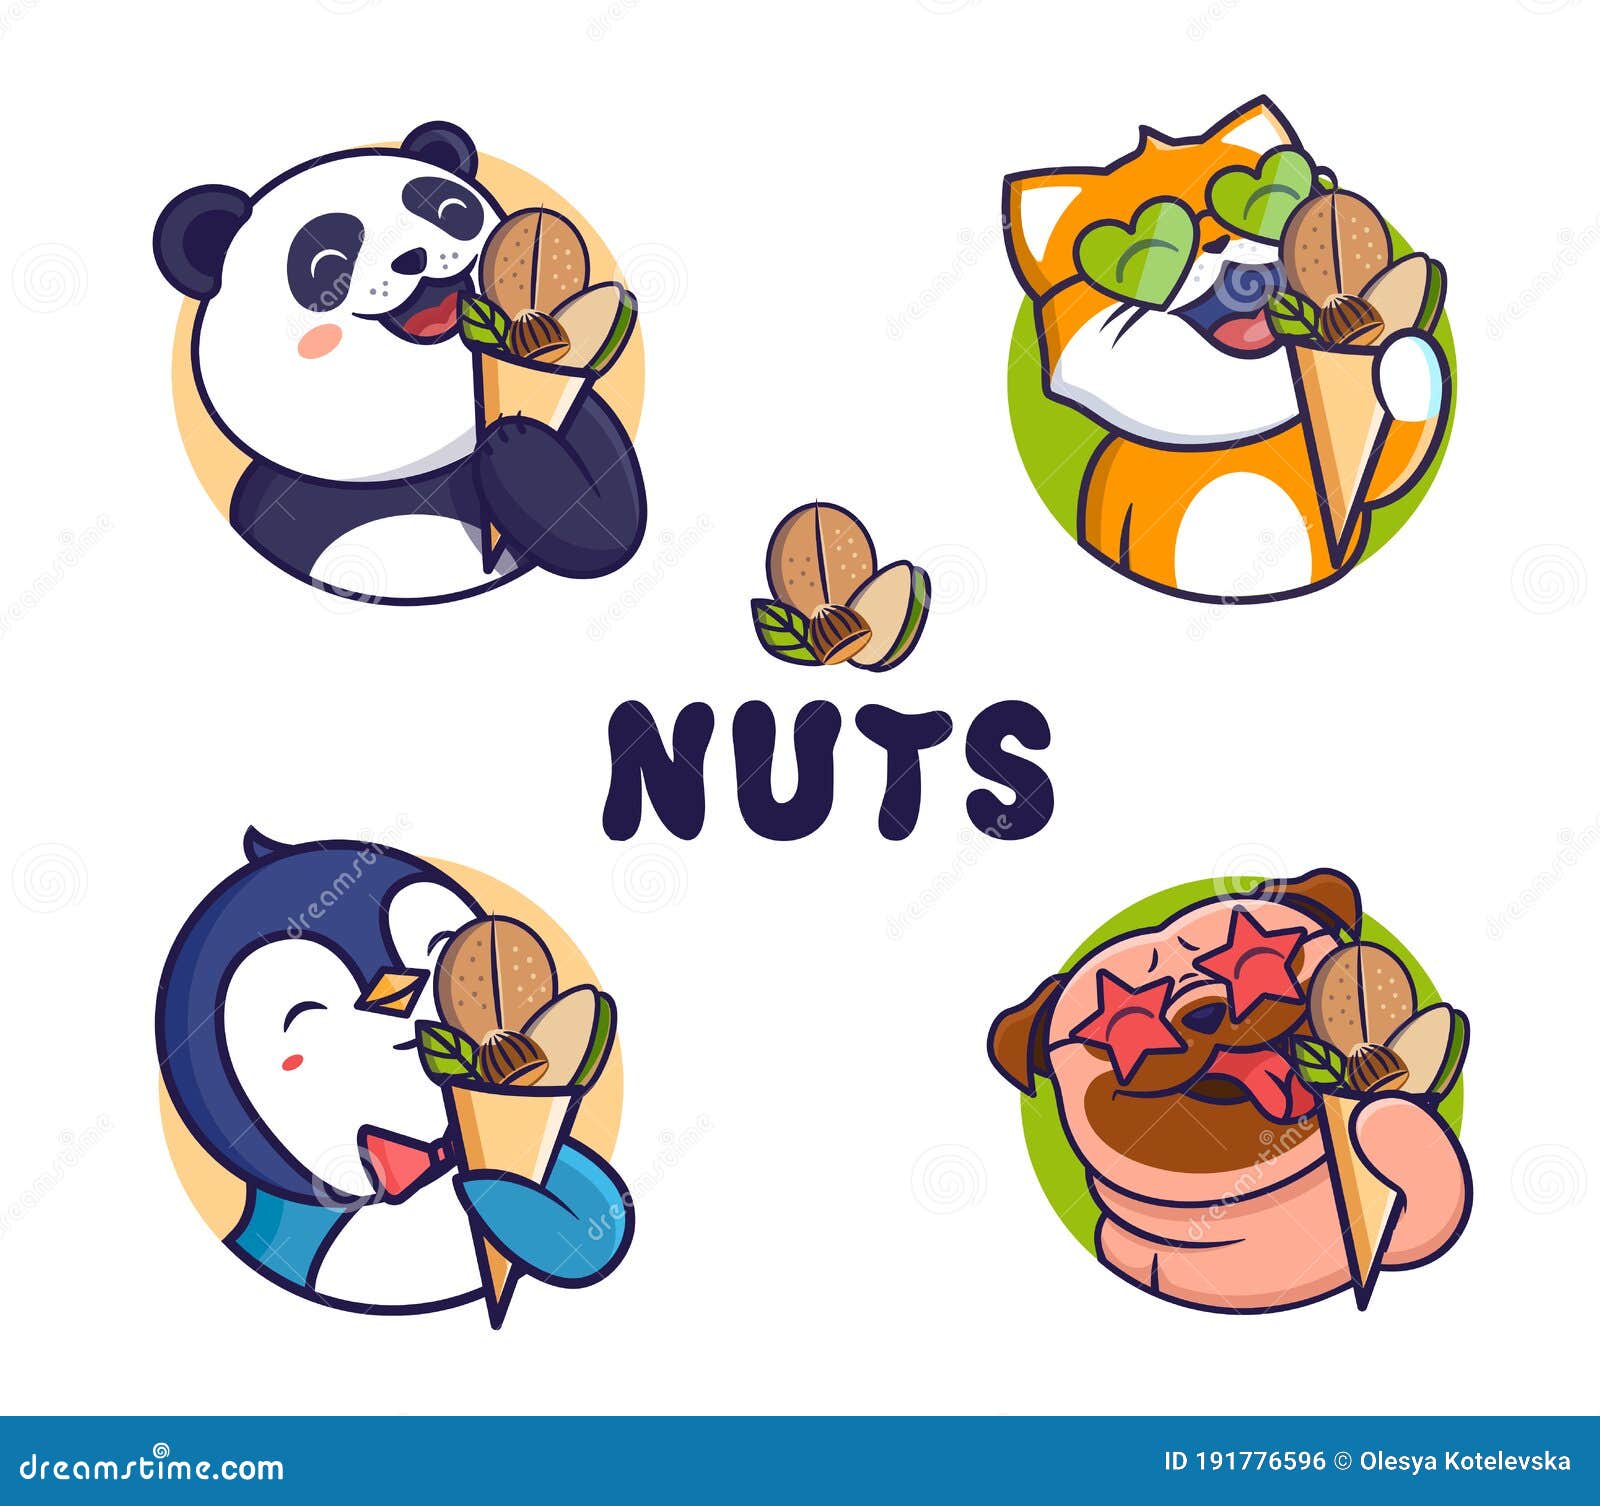 Dried Fruits And Nuts Cartoon